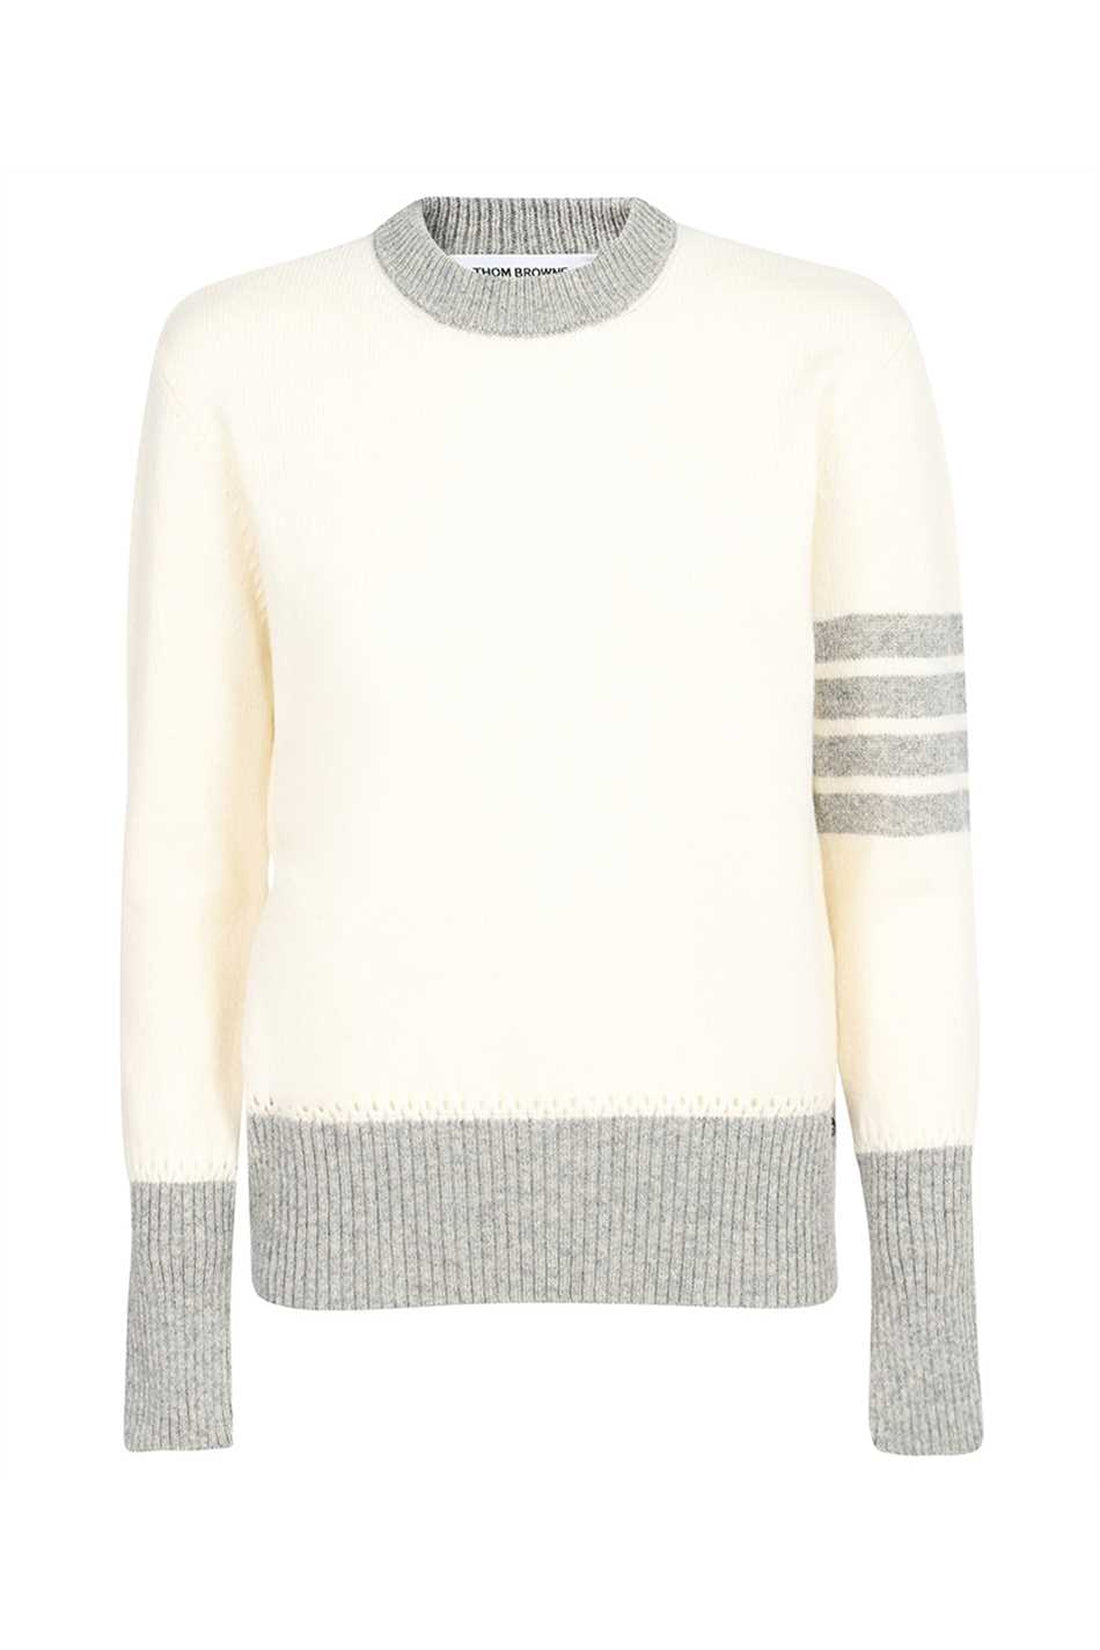 Thom Browne-OUTLET-SALE-Wool oversize sweater-ARCHIVIST